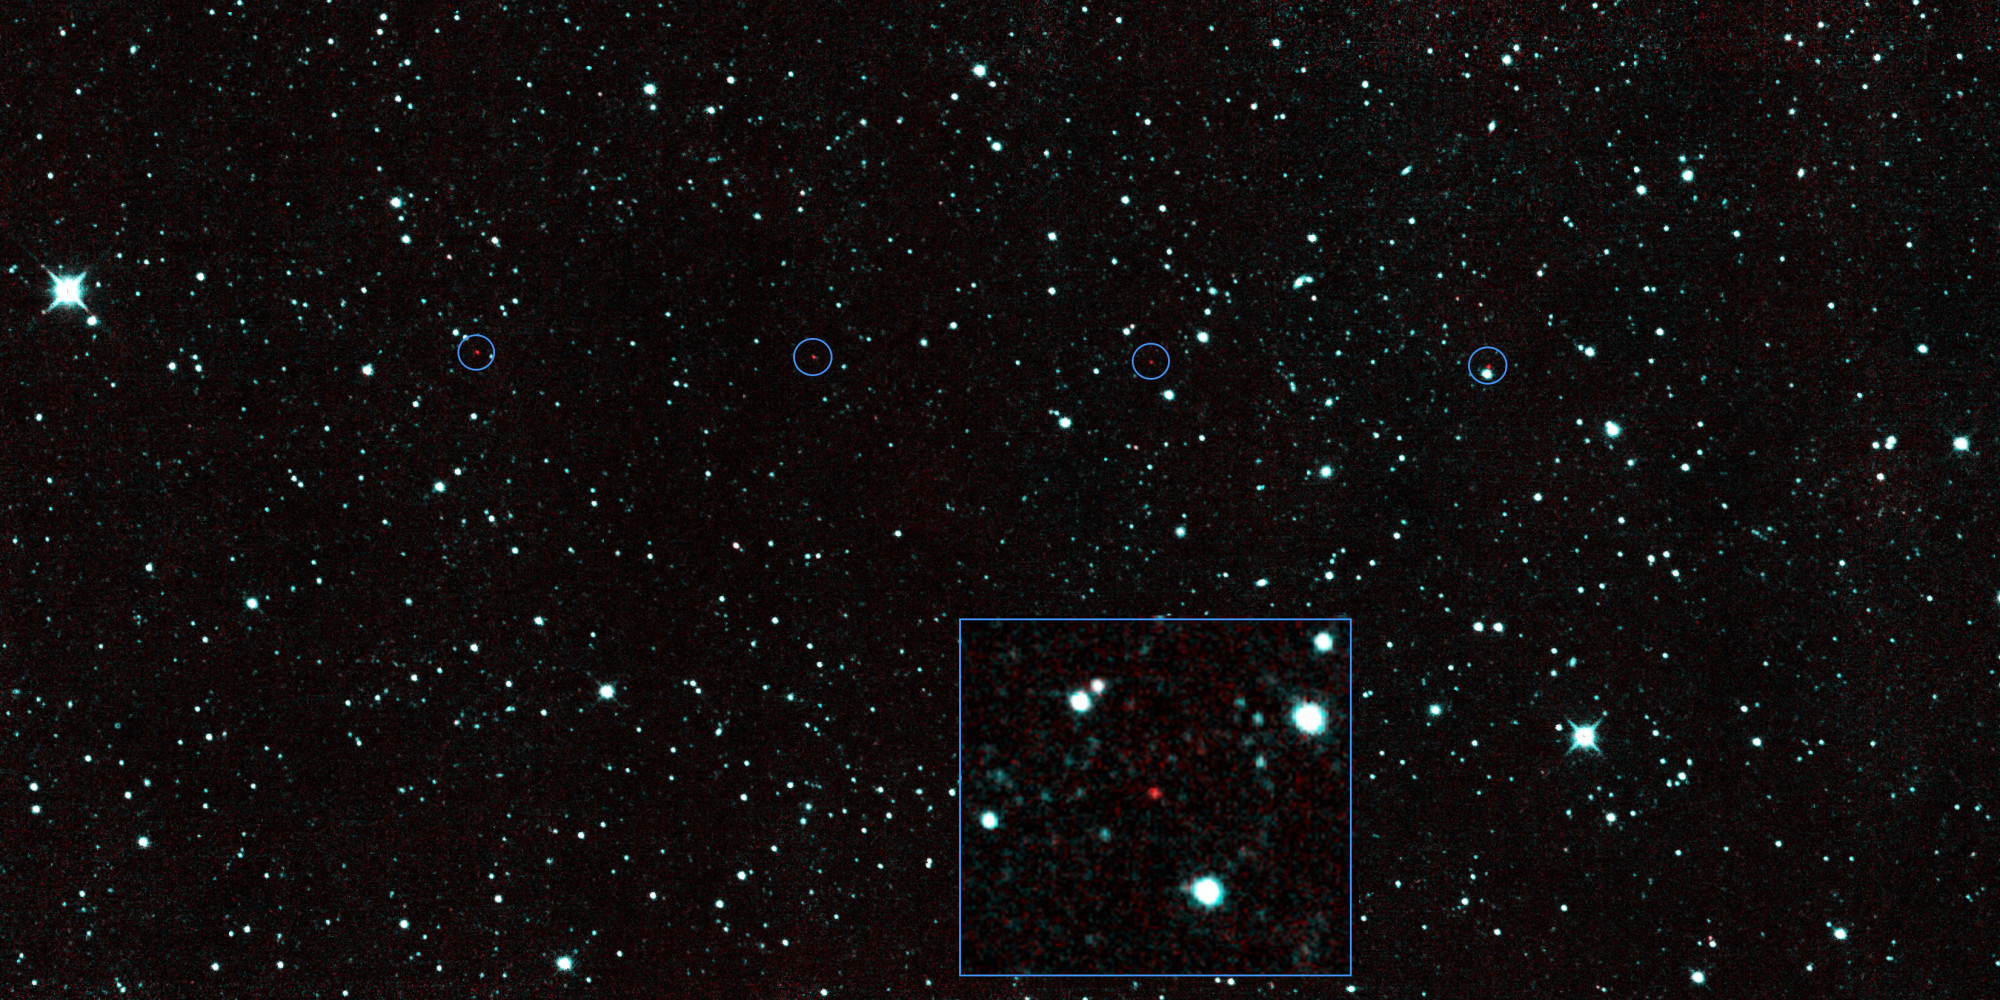 Potentially Dangerous Asteroid Spied By NASA NEOWISE Space Telescope | HuffPost2000 x 1000